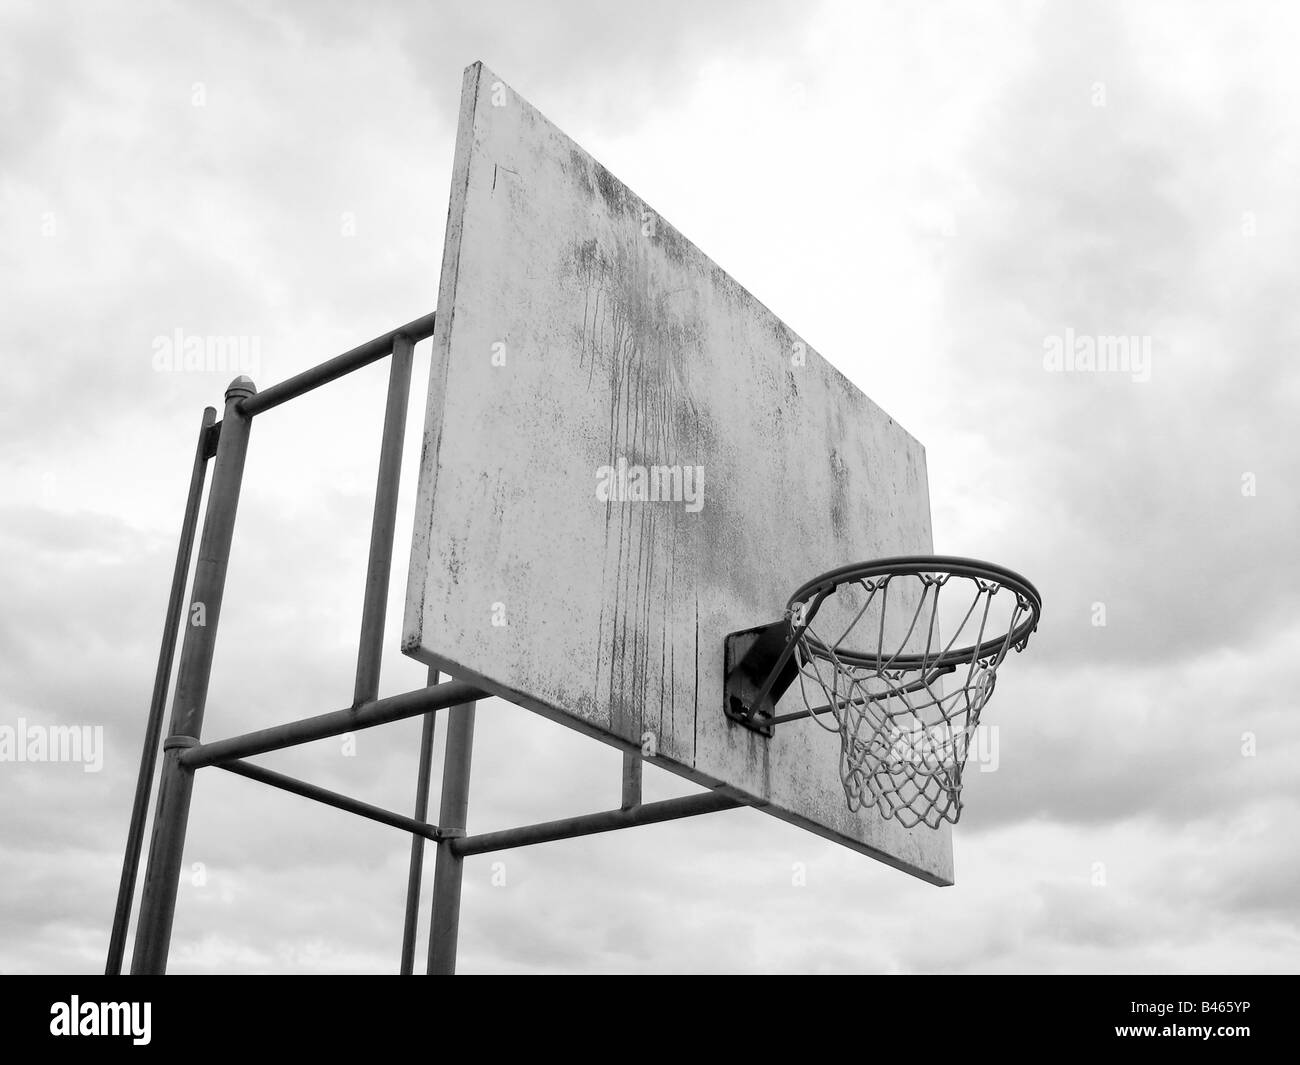 A basketball hoop found at the park in black and white Stock Photo